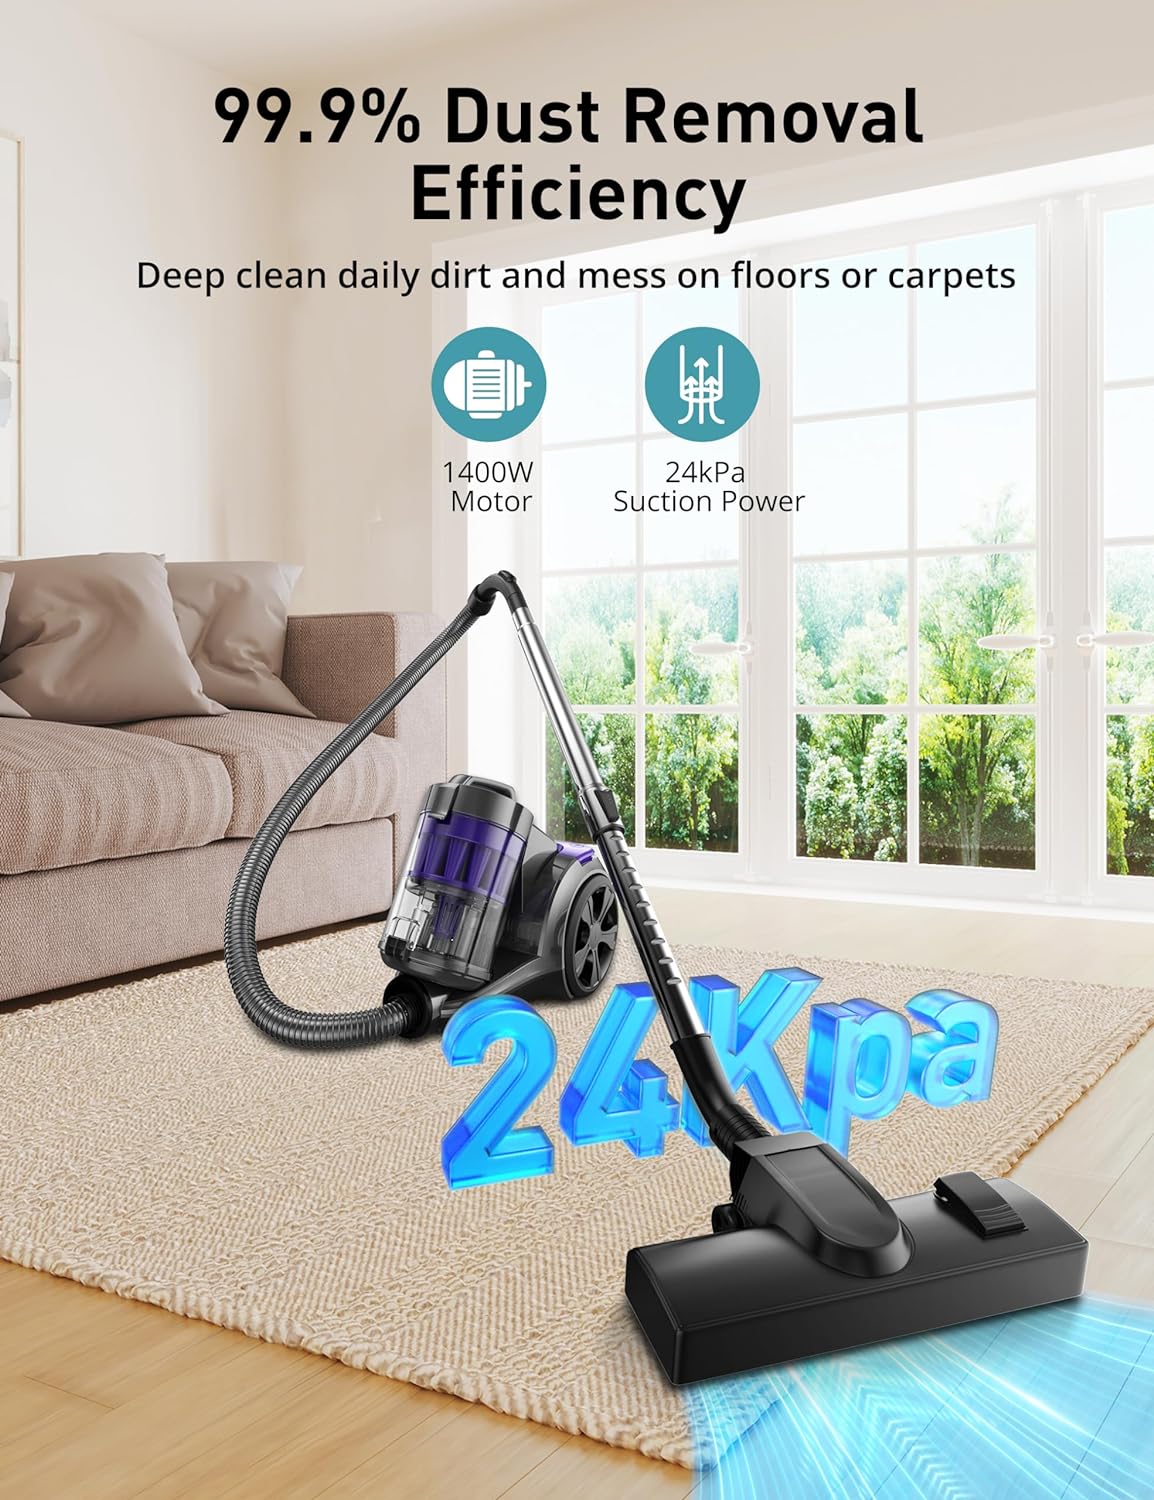 Canister Vacuum Cleaner, Aspiron 1400W Bagless Vacuum Cleaner, Multi-Cyclonic Filtration, 2 Anti-Allergen HEPA Filters, 3.5QT Dust Cup, 4 Tools, Corded Vacuum for Hard Floors, Carpets, Pet Hair